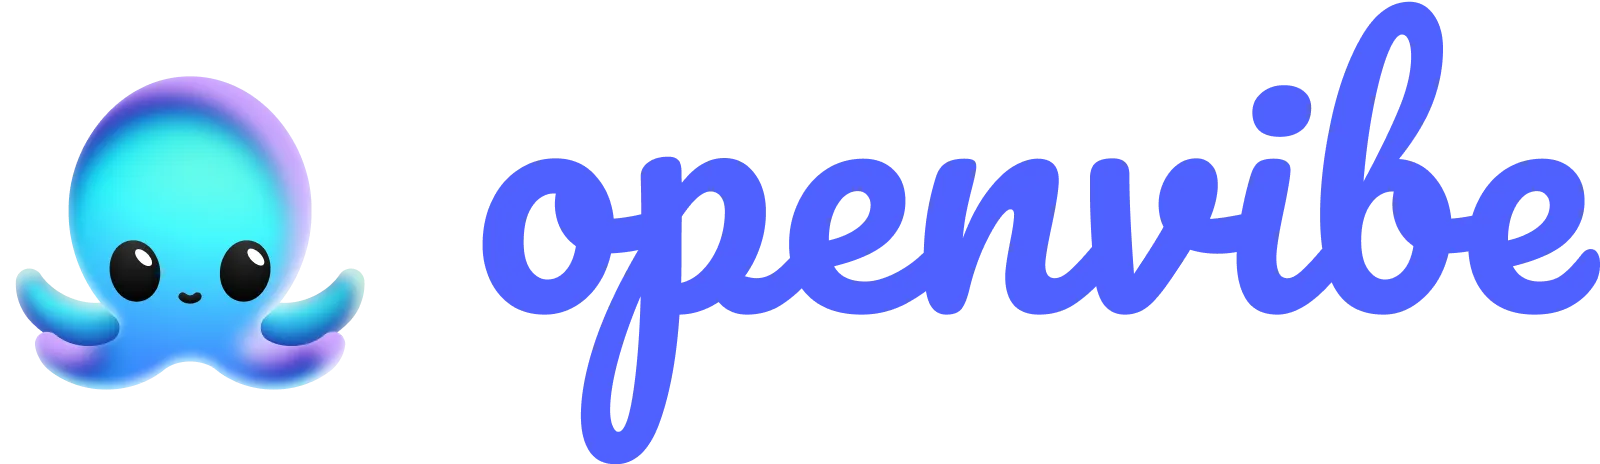 Blue openvibe logo with octopus